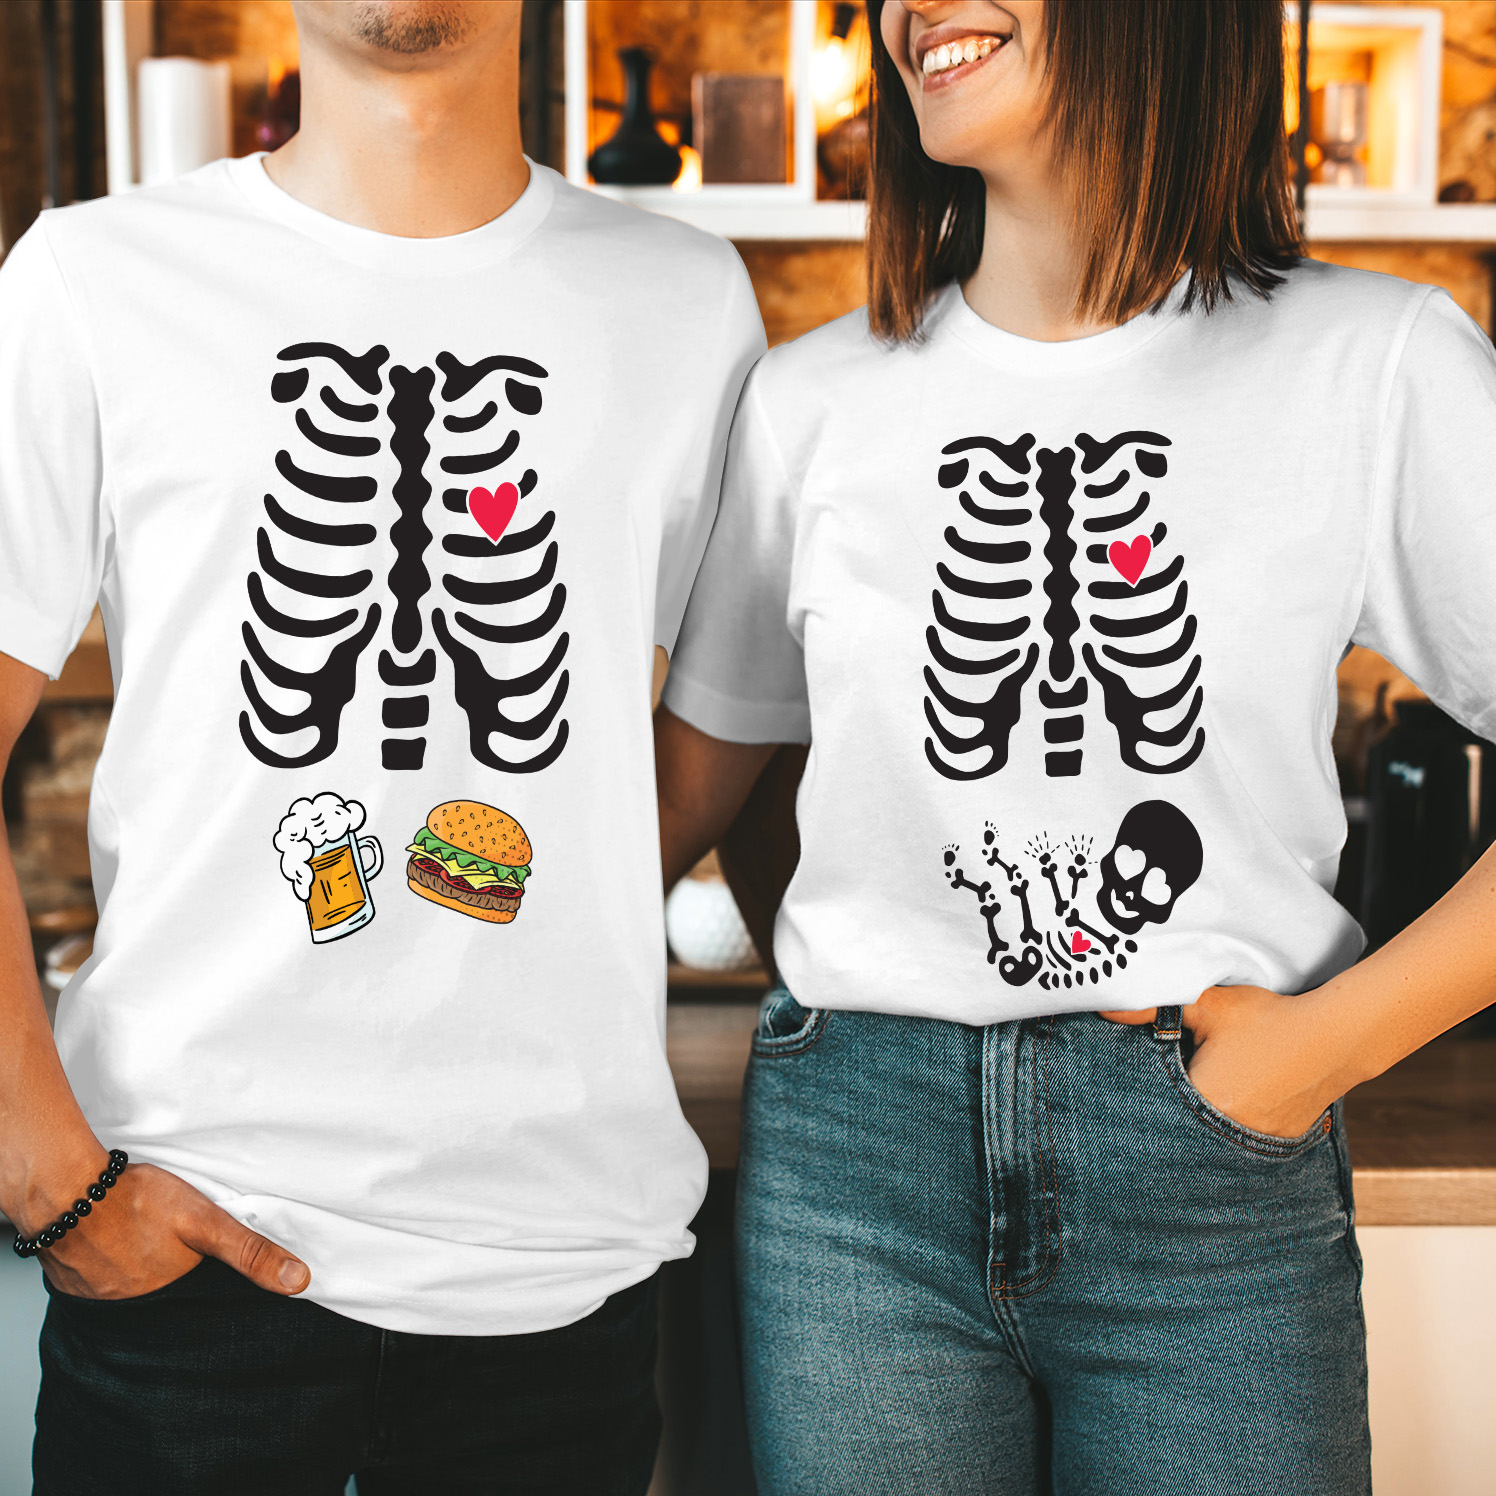 Beer and Burger Skeleton Ribcage Halloween Maternity T-Shirt Funny Couple Costume Pregnant Belly Skeleton Baby Mom Mum to Be Pregnancy Announcement Tee Parents T Shirt